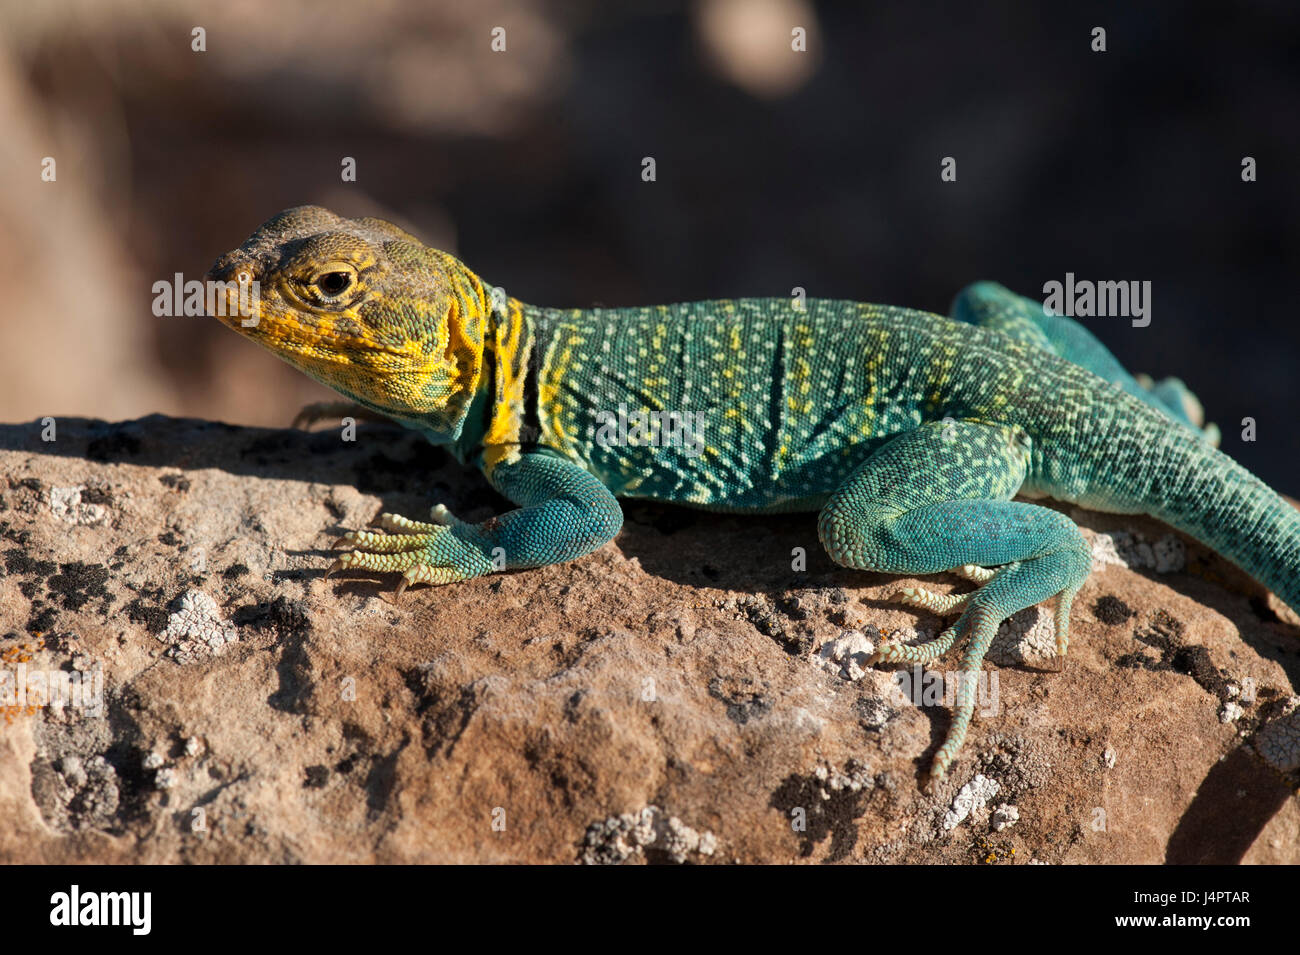 Close-up of a male Collared Lizard (Crotaphytus collaris), a common denizen of the deserts of the American Southwest. Stock Photo